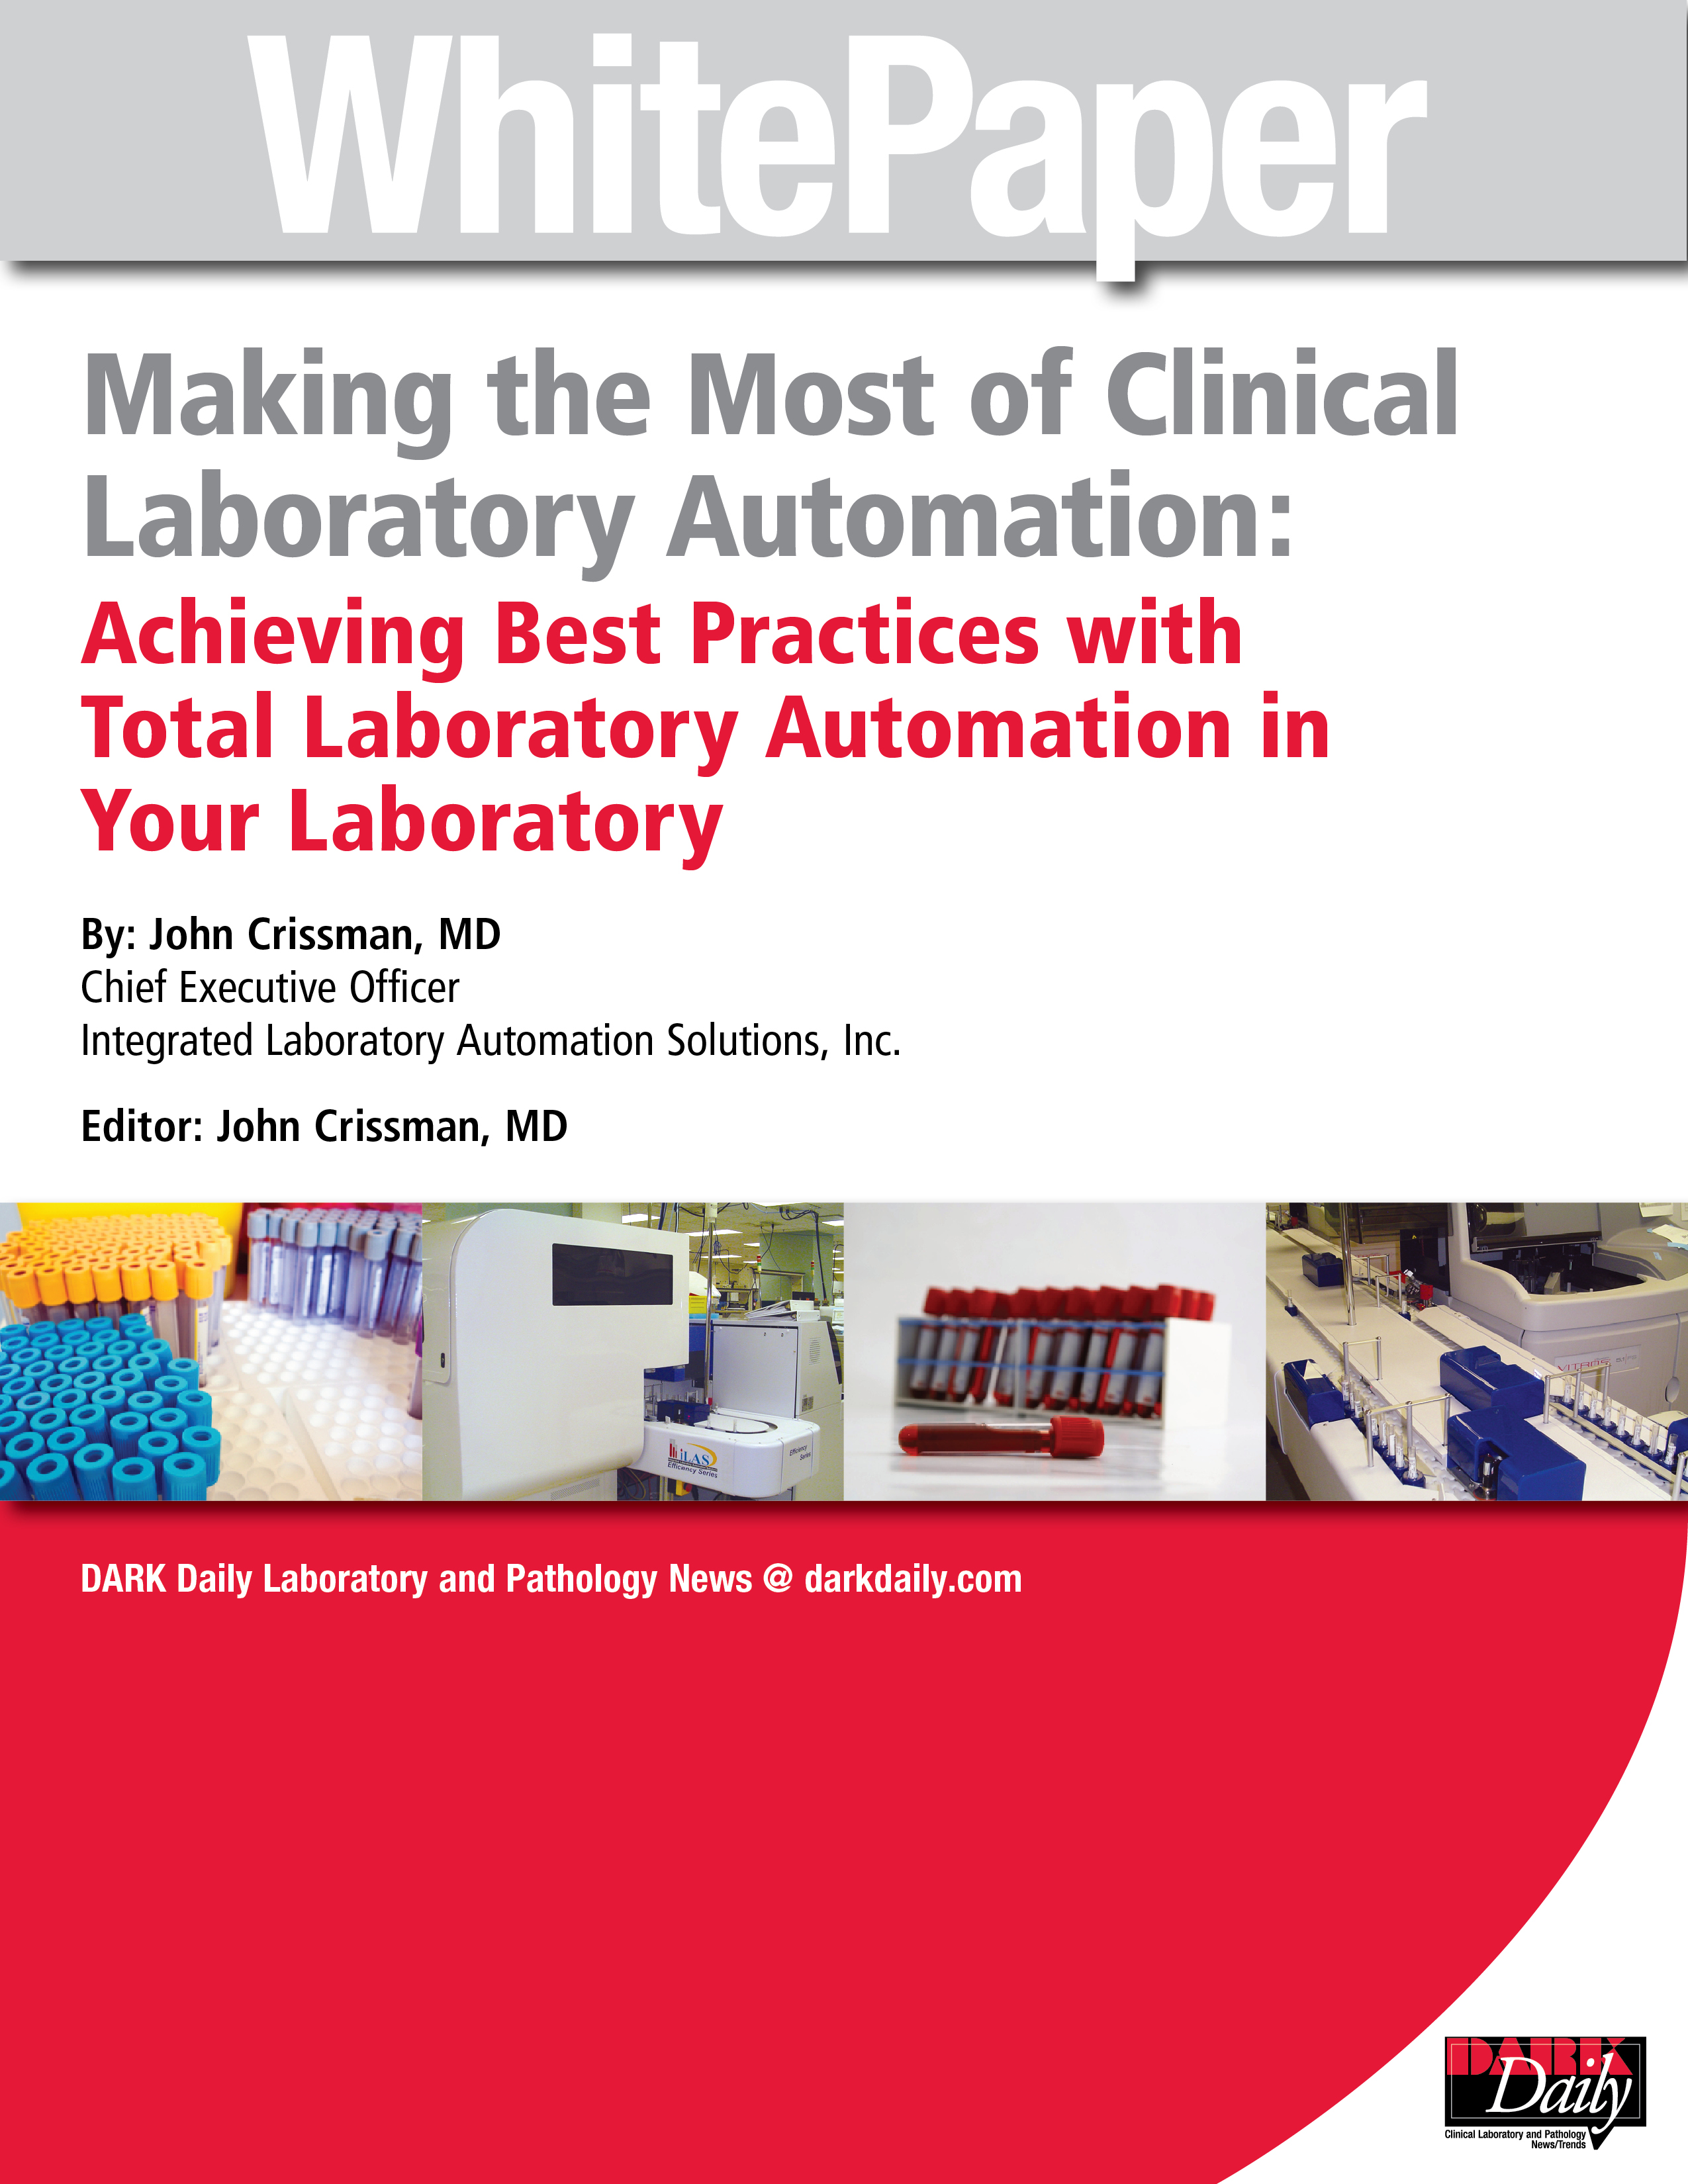 Making the Most of Clinical Laboratory Automation: Achieving Best Practices with Total Laboratory Automation in Your Laboratory